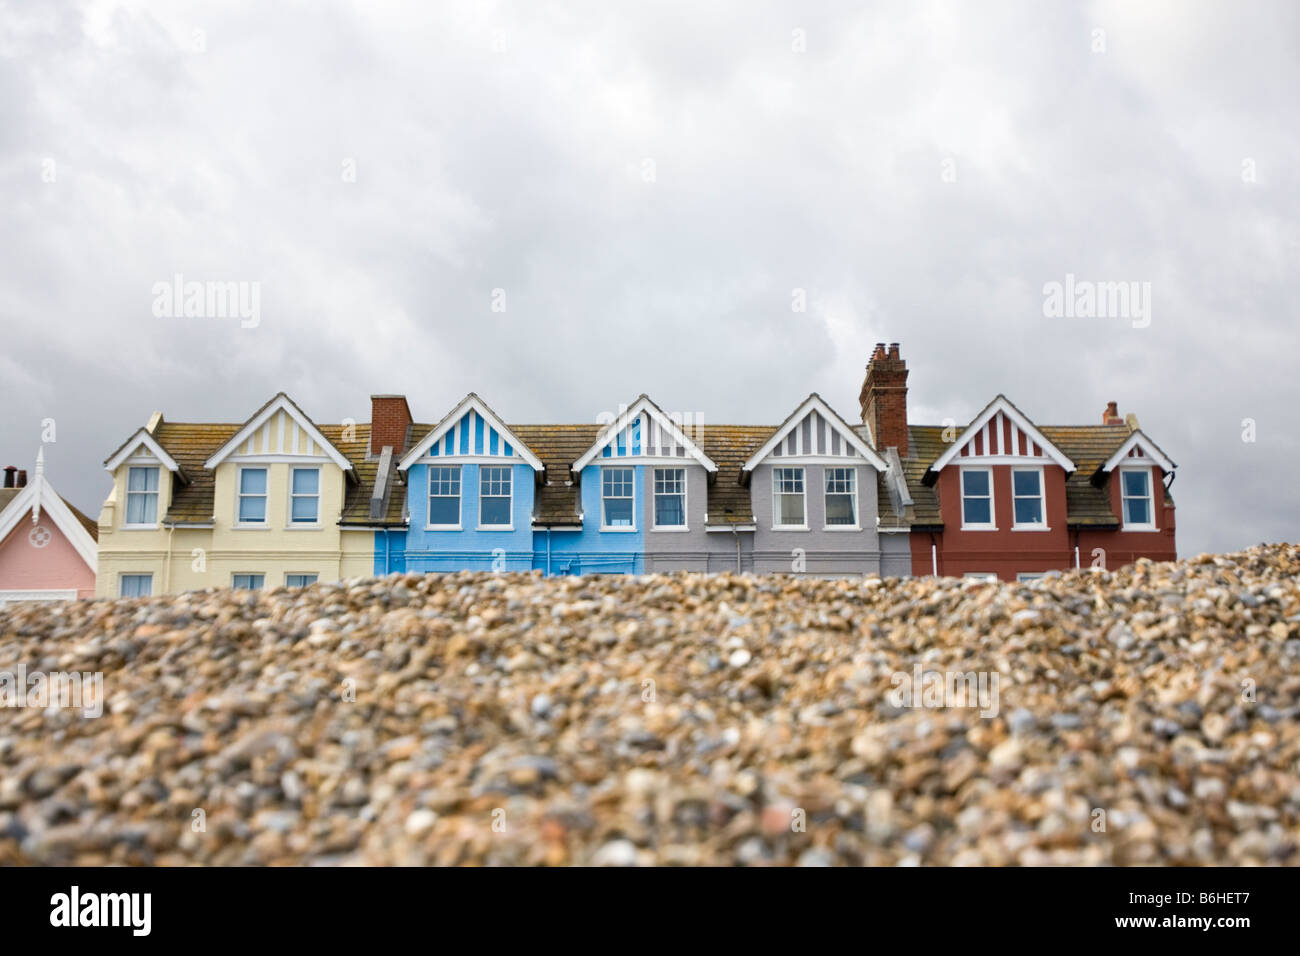 Roofs of houses behind the shingle of Aldeburgh beach Stock Photo